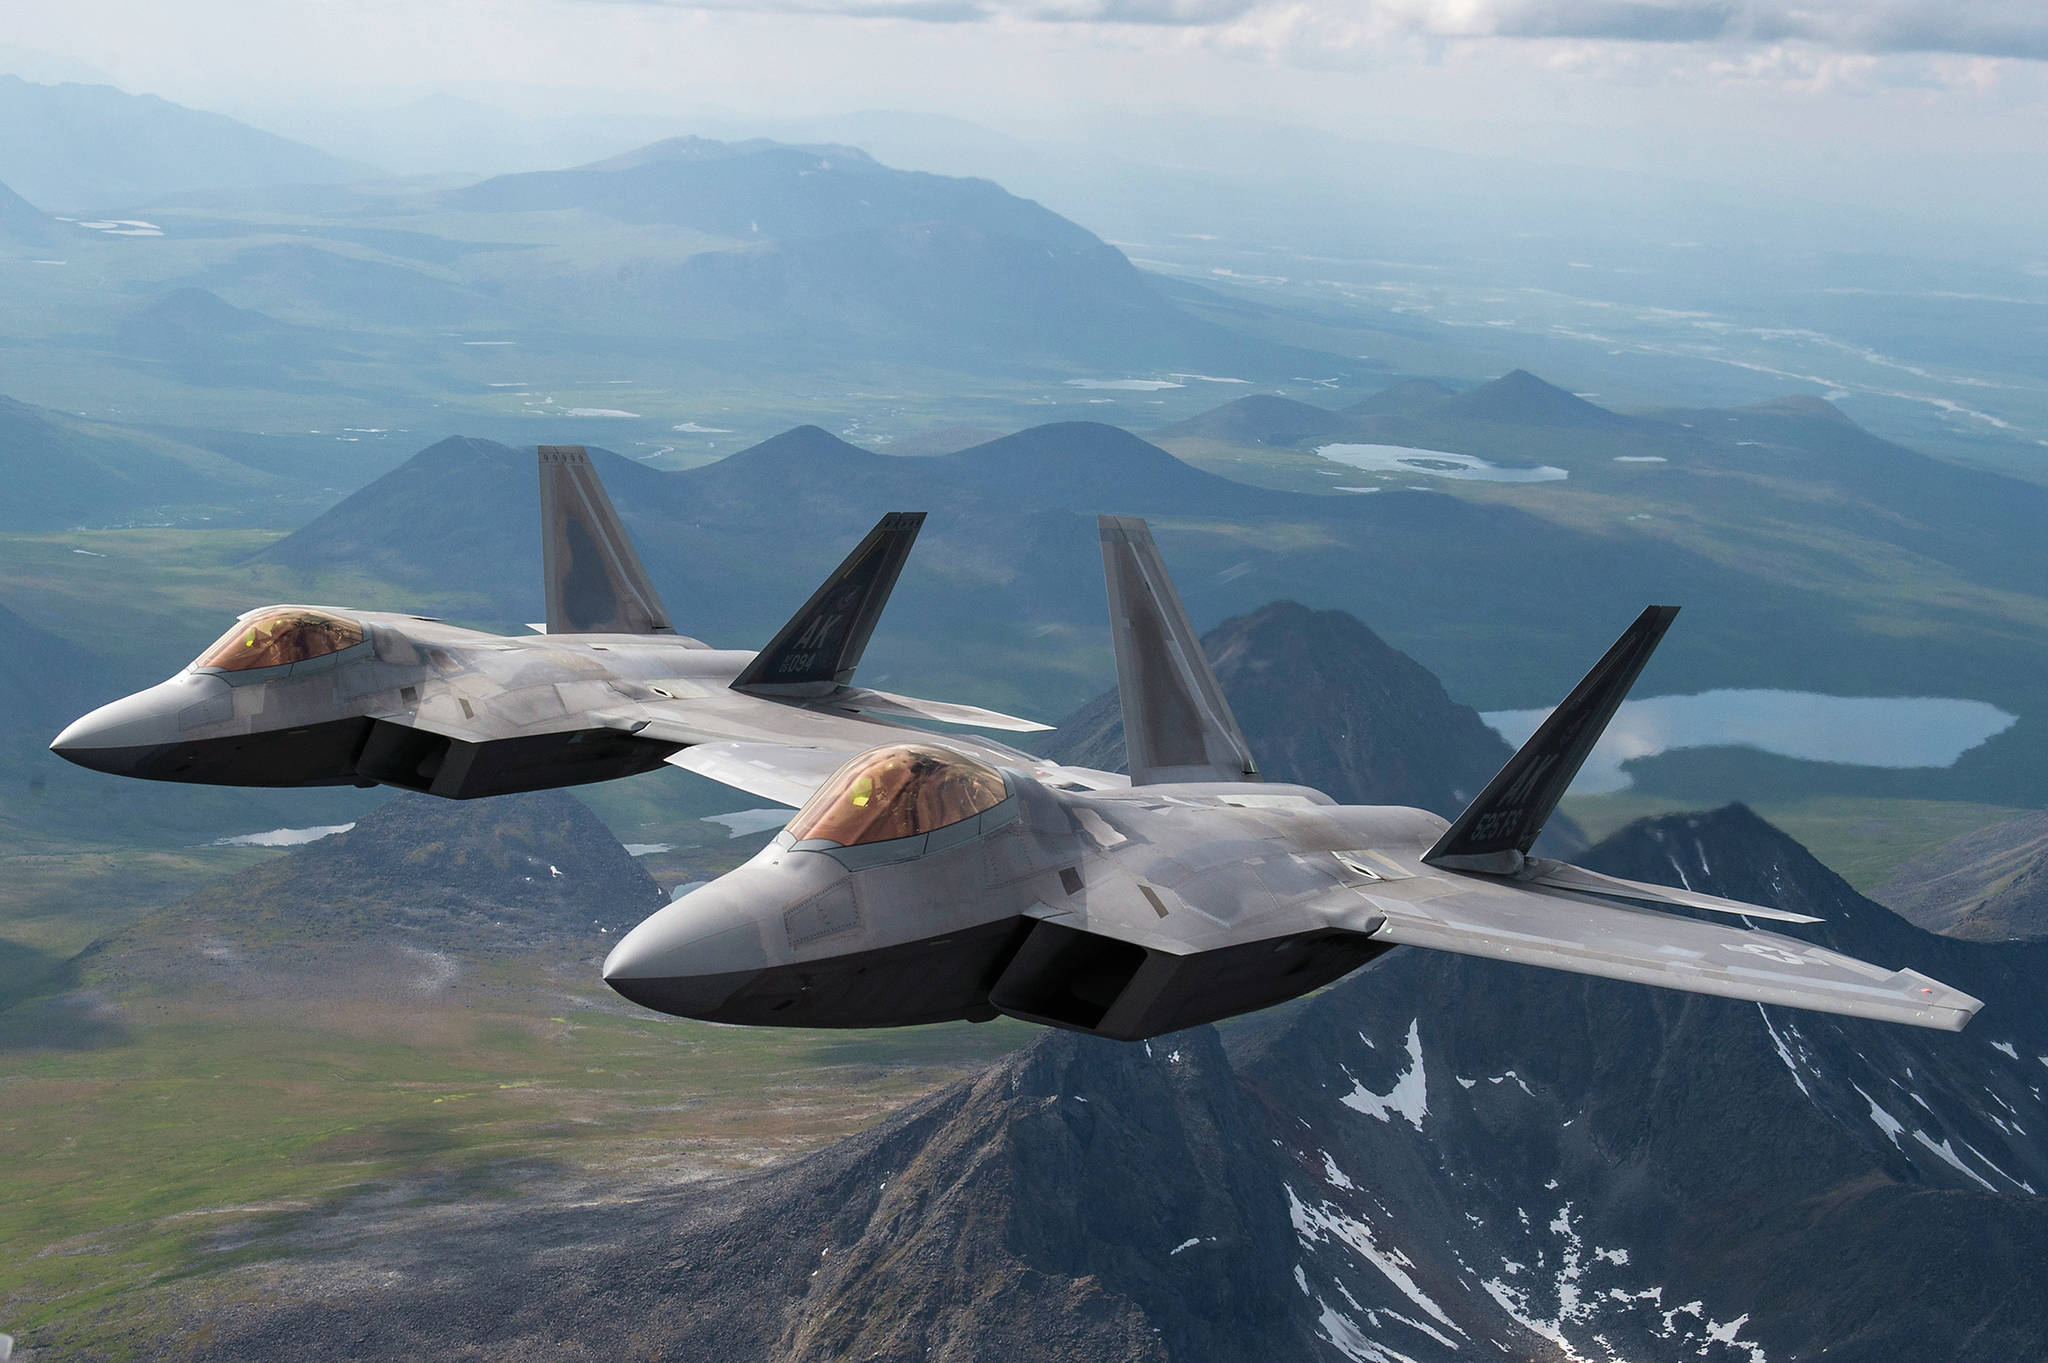 U.S. Air Force F-22 Raptors from Joint Base Elmendorf-Richardson, fly in formation over the Joint Pacific Alaska Range Complex on July 18, 2019. (U.S. Air Force photo by Staff Sgt. James Richardson)